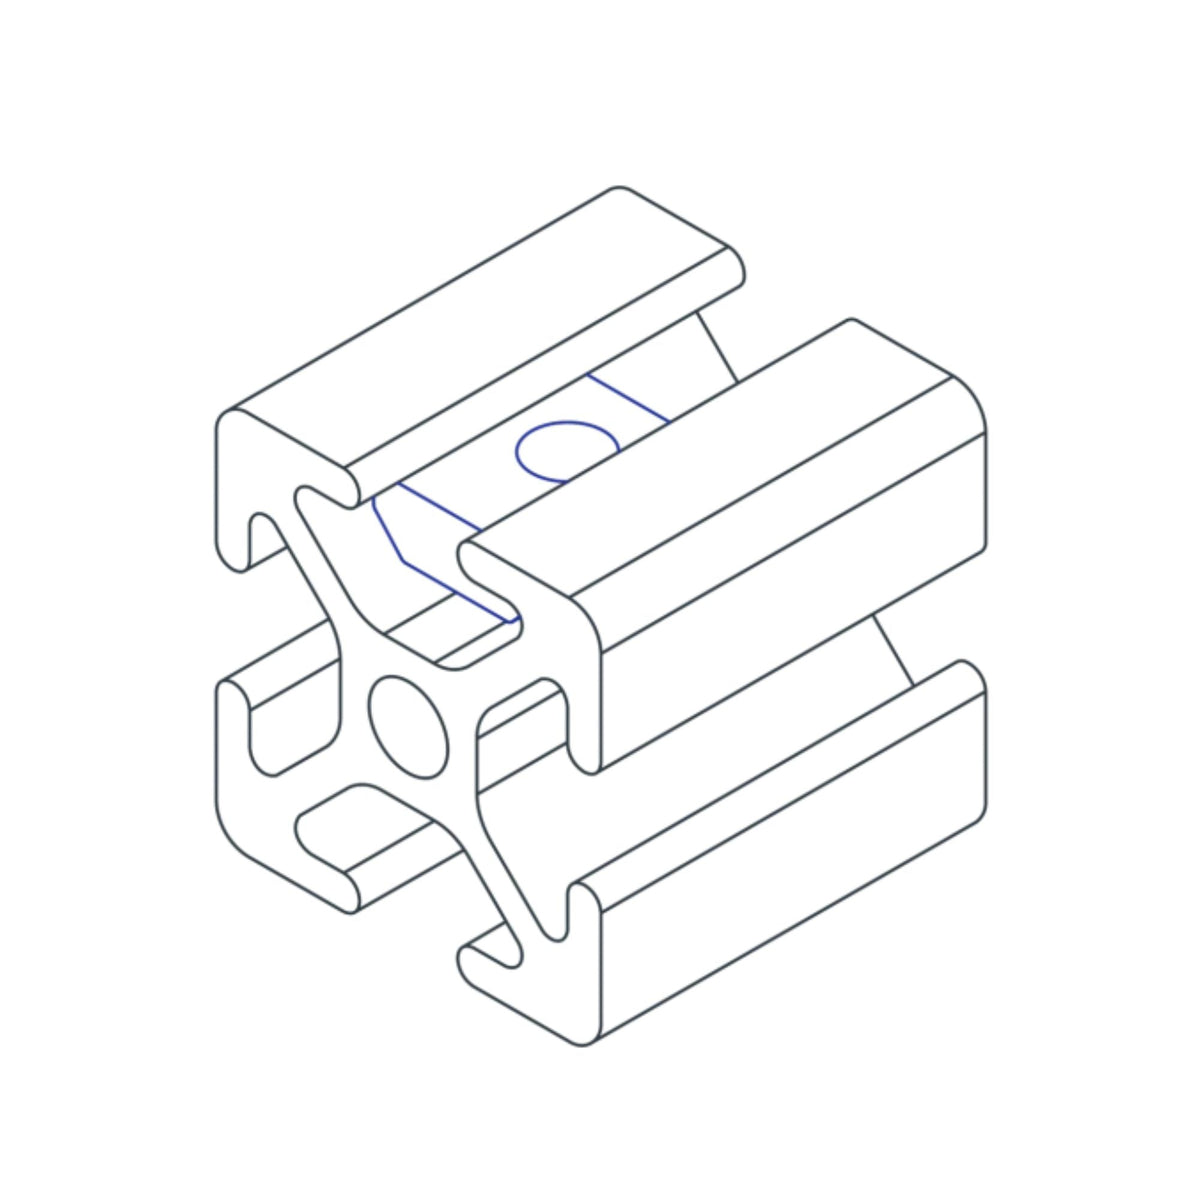 diagram of a slide-in t-nut being inserted into the t-slot of a metal bar